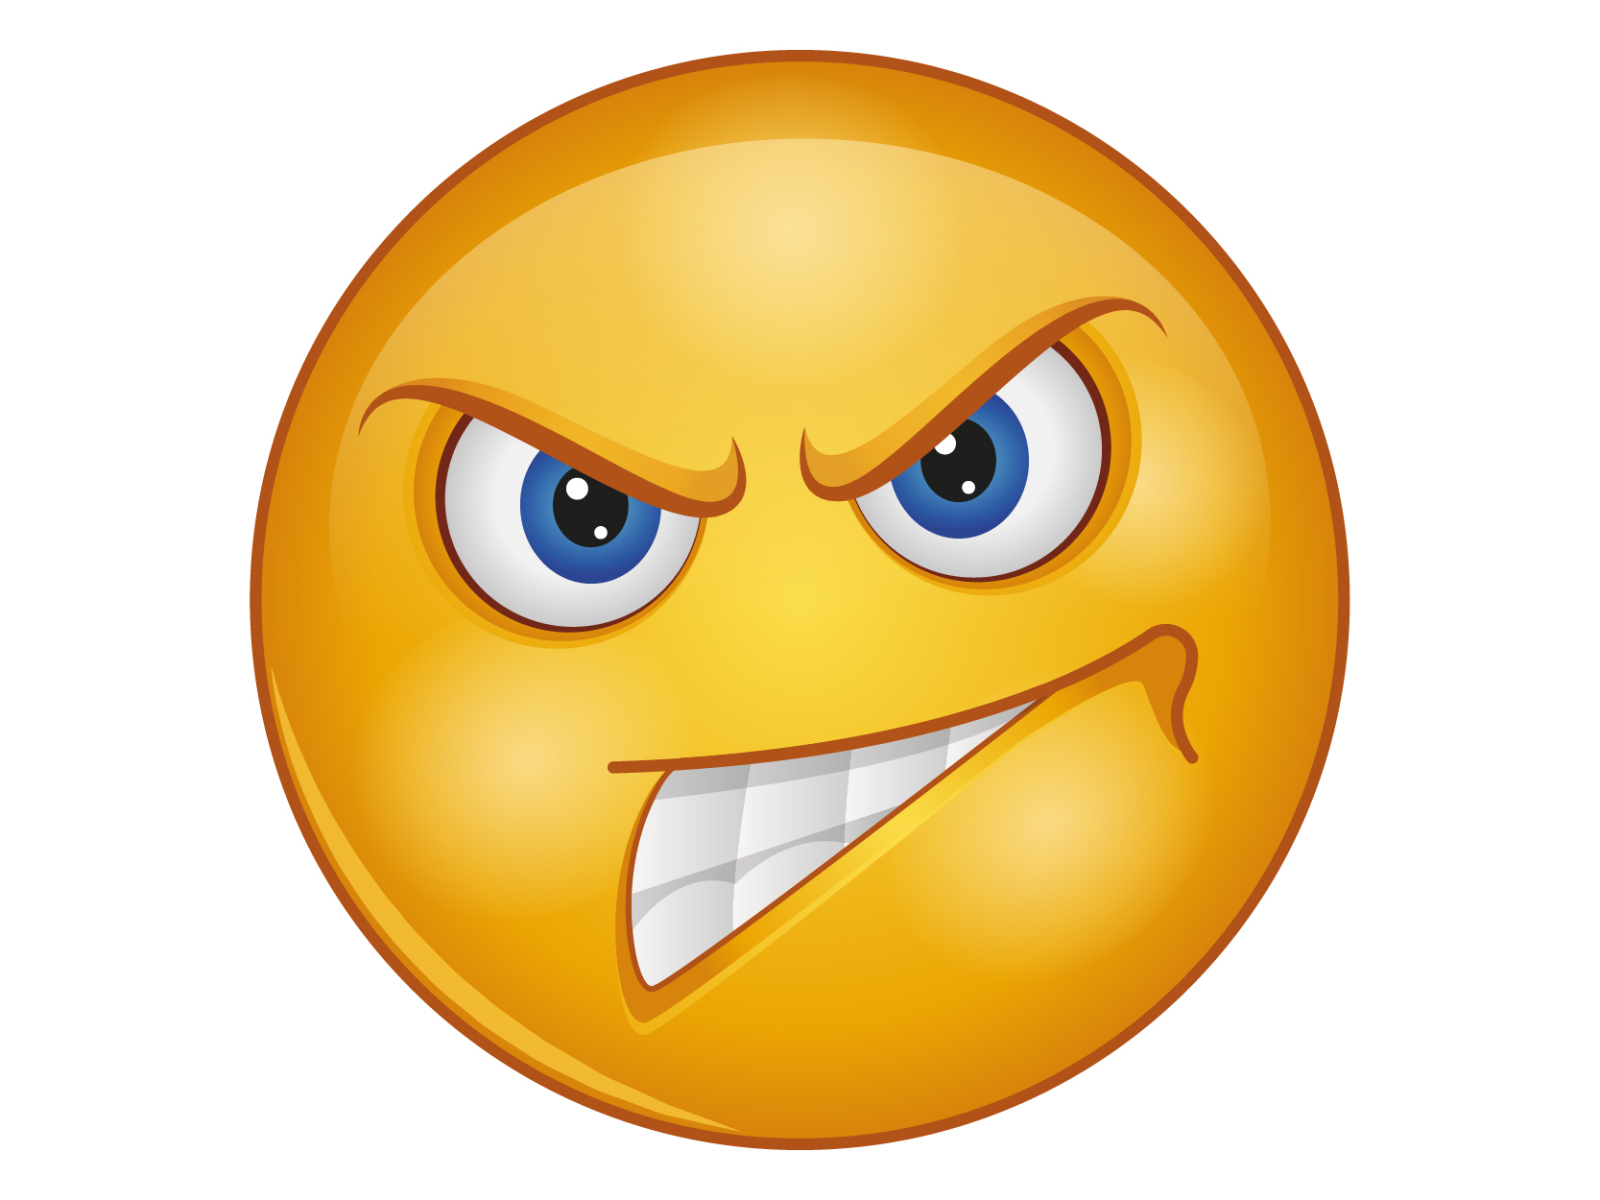 Smiley Face Emoji Clipart Angry Emoji Face By Graphic Mall On Dribbble ...